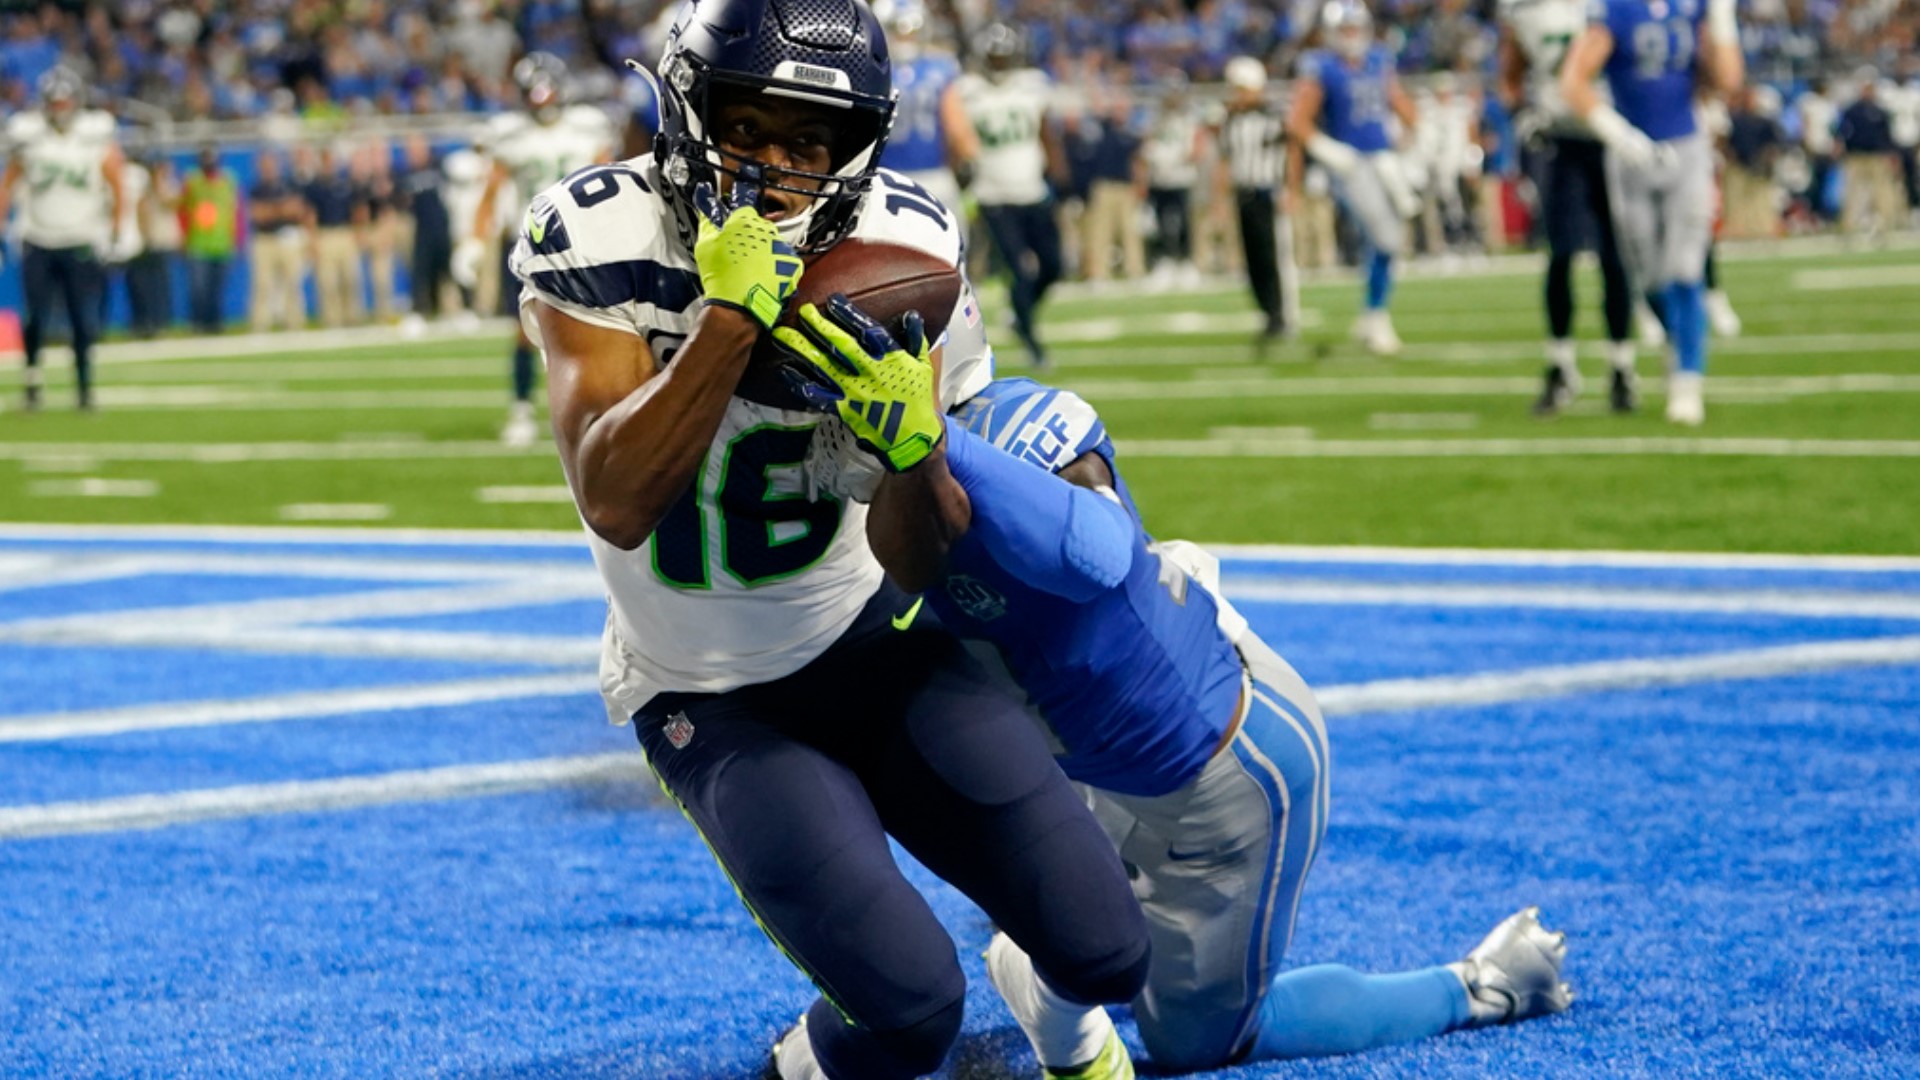 The voice of the Seahawks discusses how the team earned a 37-31 overtime win over the Lions in Week 2.